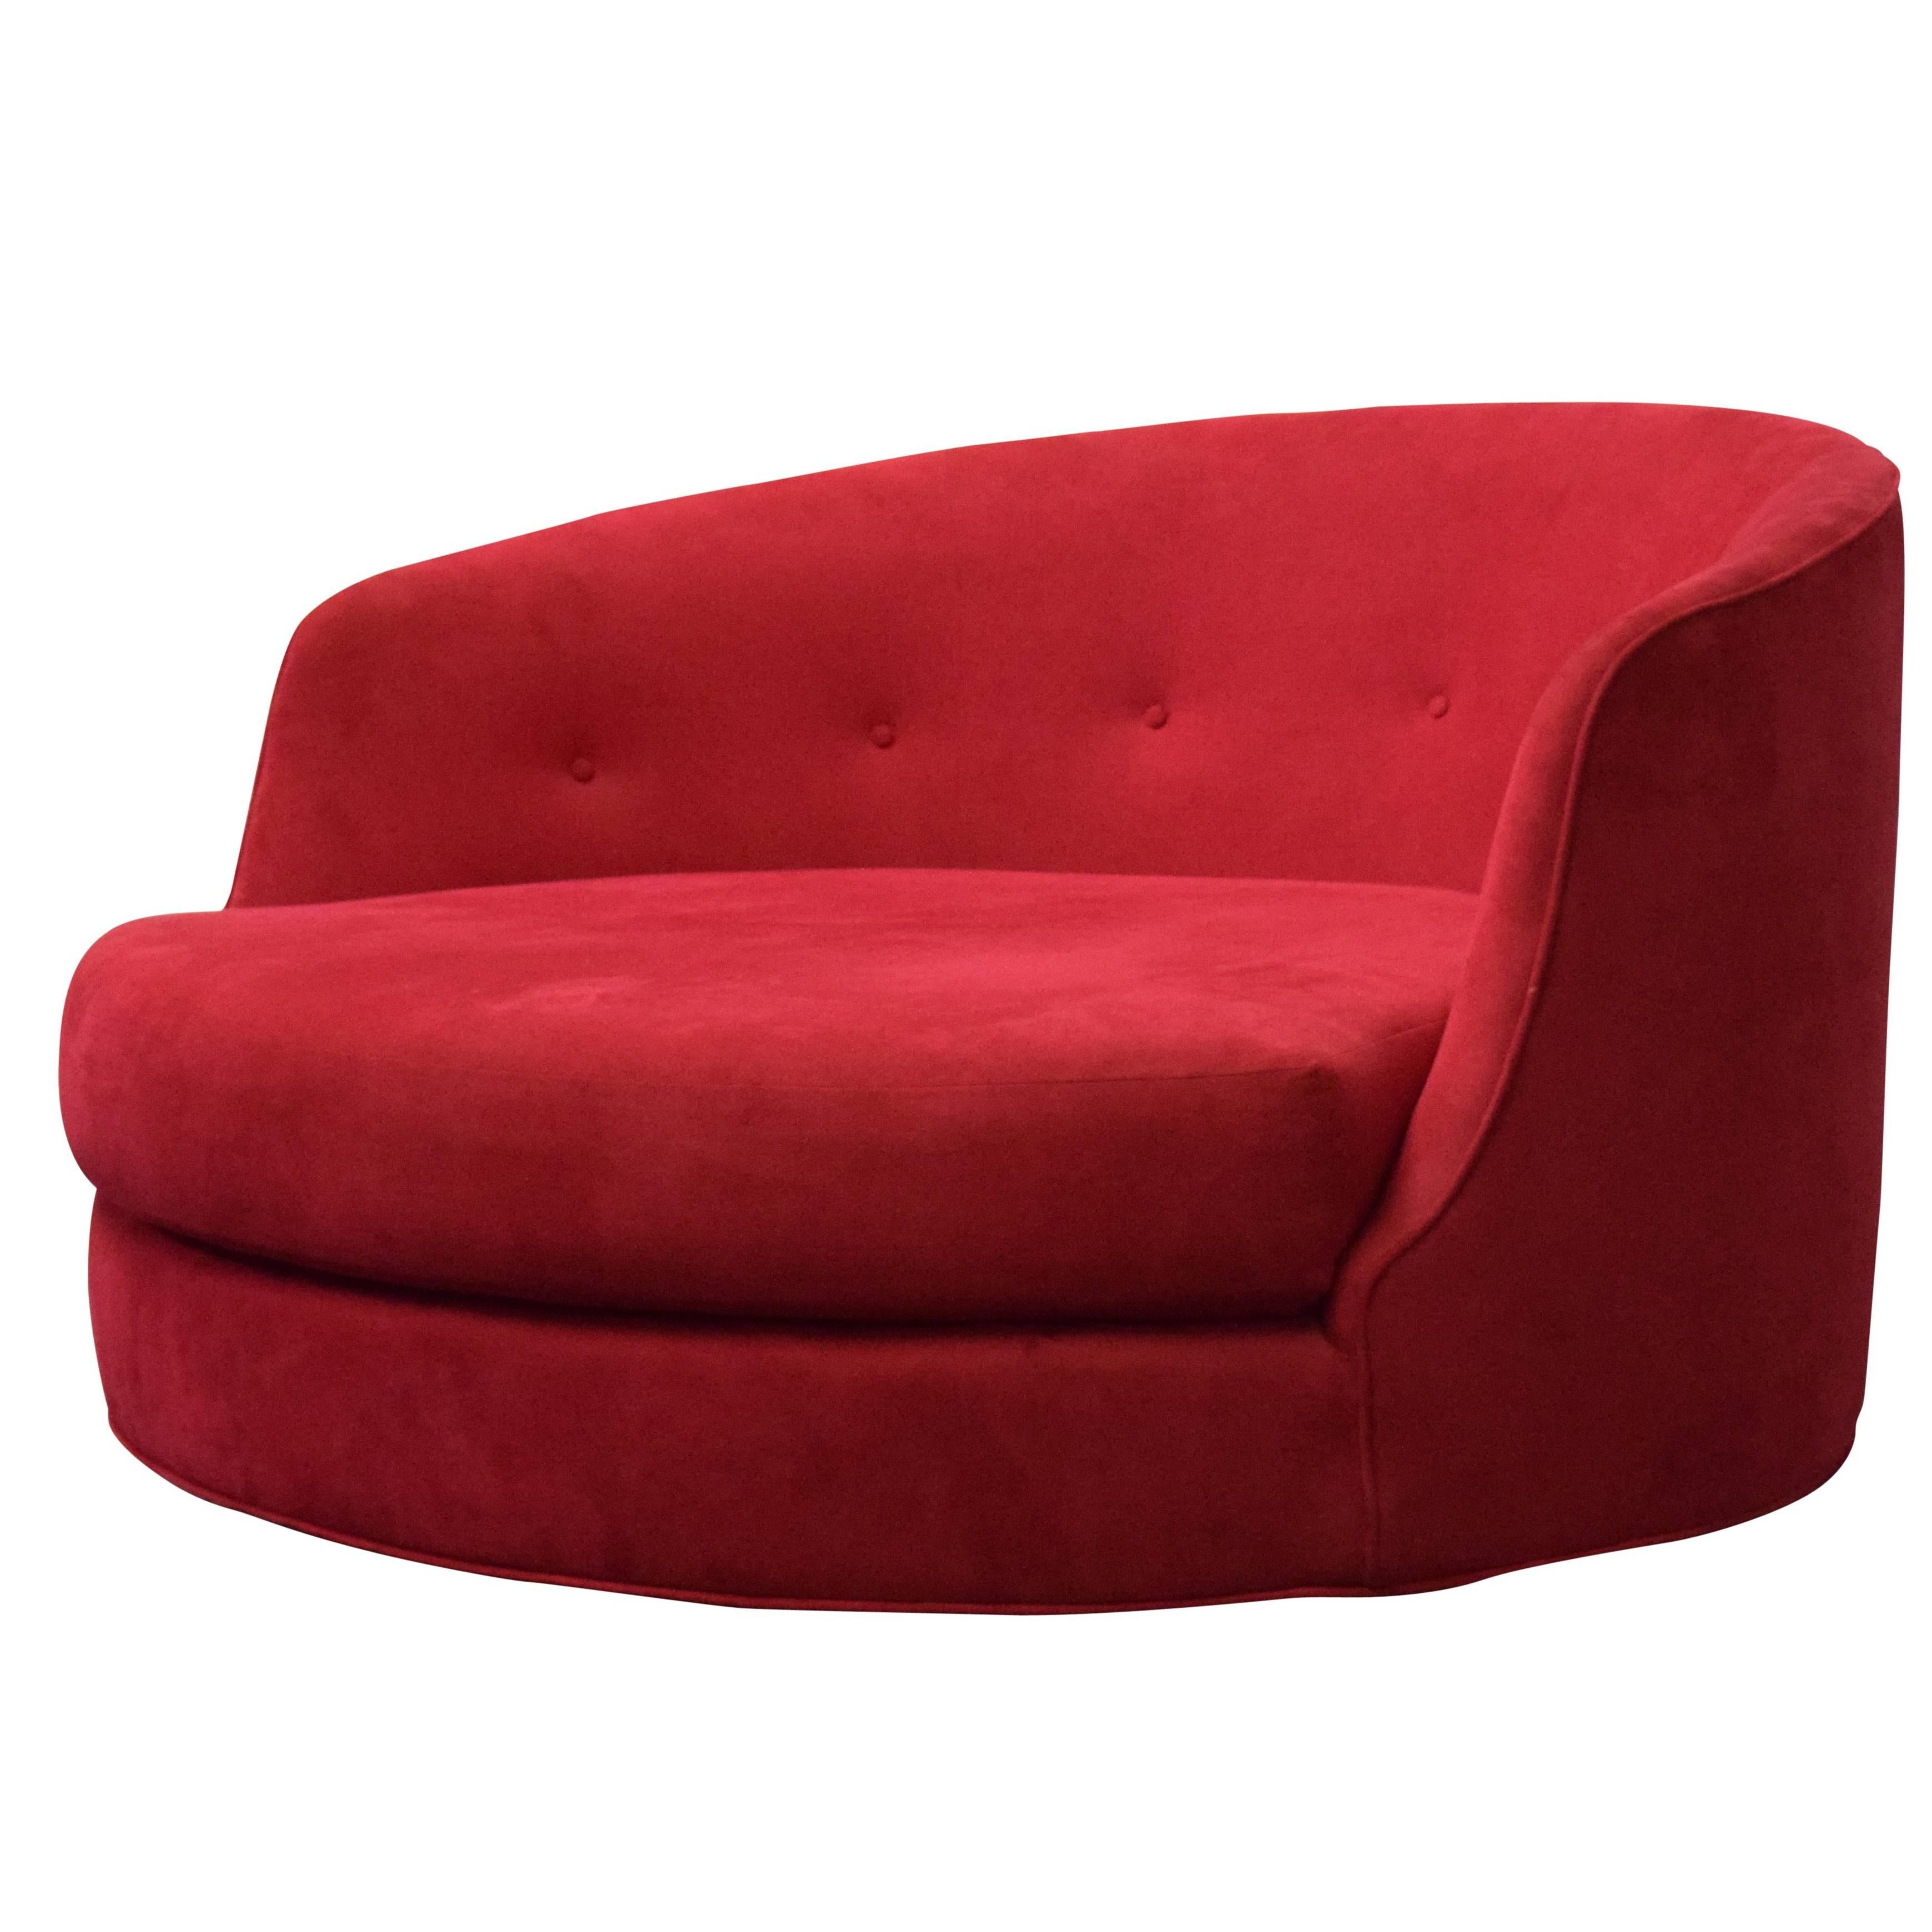 Large Milo Baughman swivel lounge chair.

3 Large Milo Baughman swivel lounge chairs available 
Chairs need to be reupholstered- All different fabric colors/patterns
1. Red pictured 
2. Floral pattern
3. Floral pattern
Chairs have walnut swivel